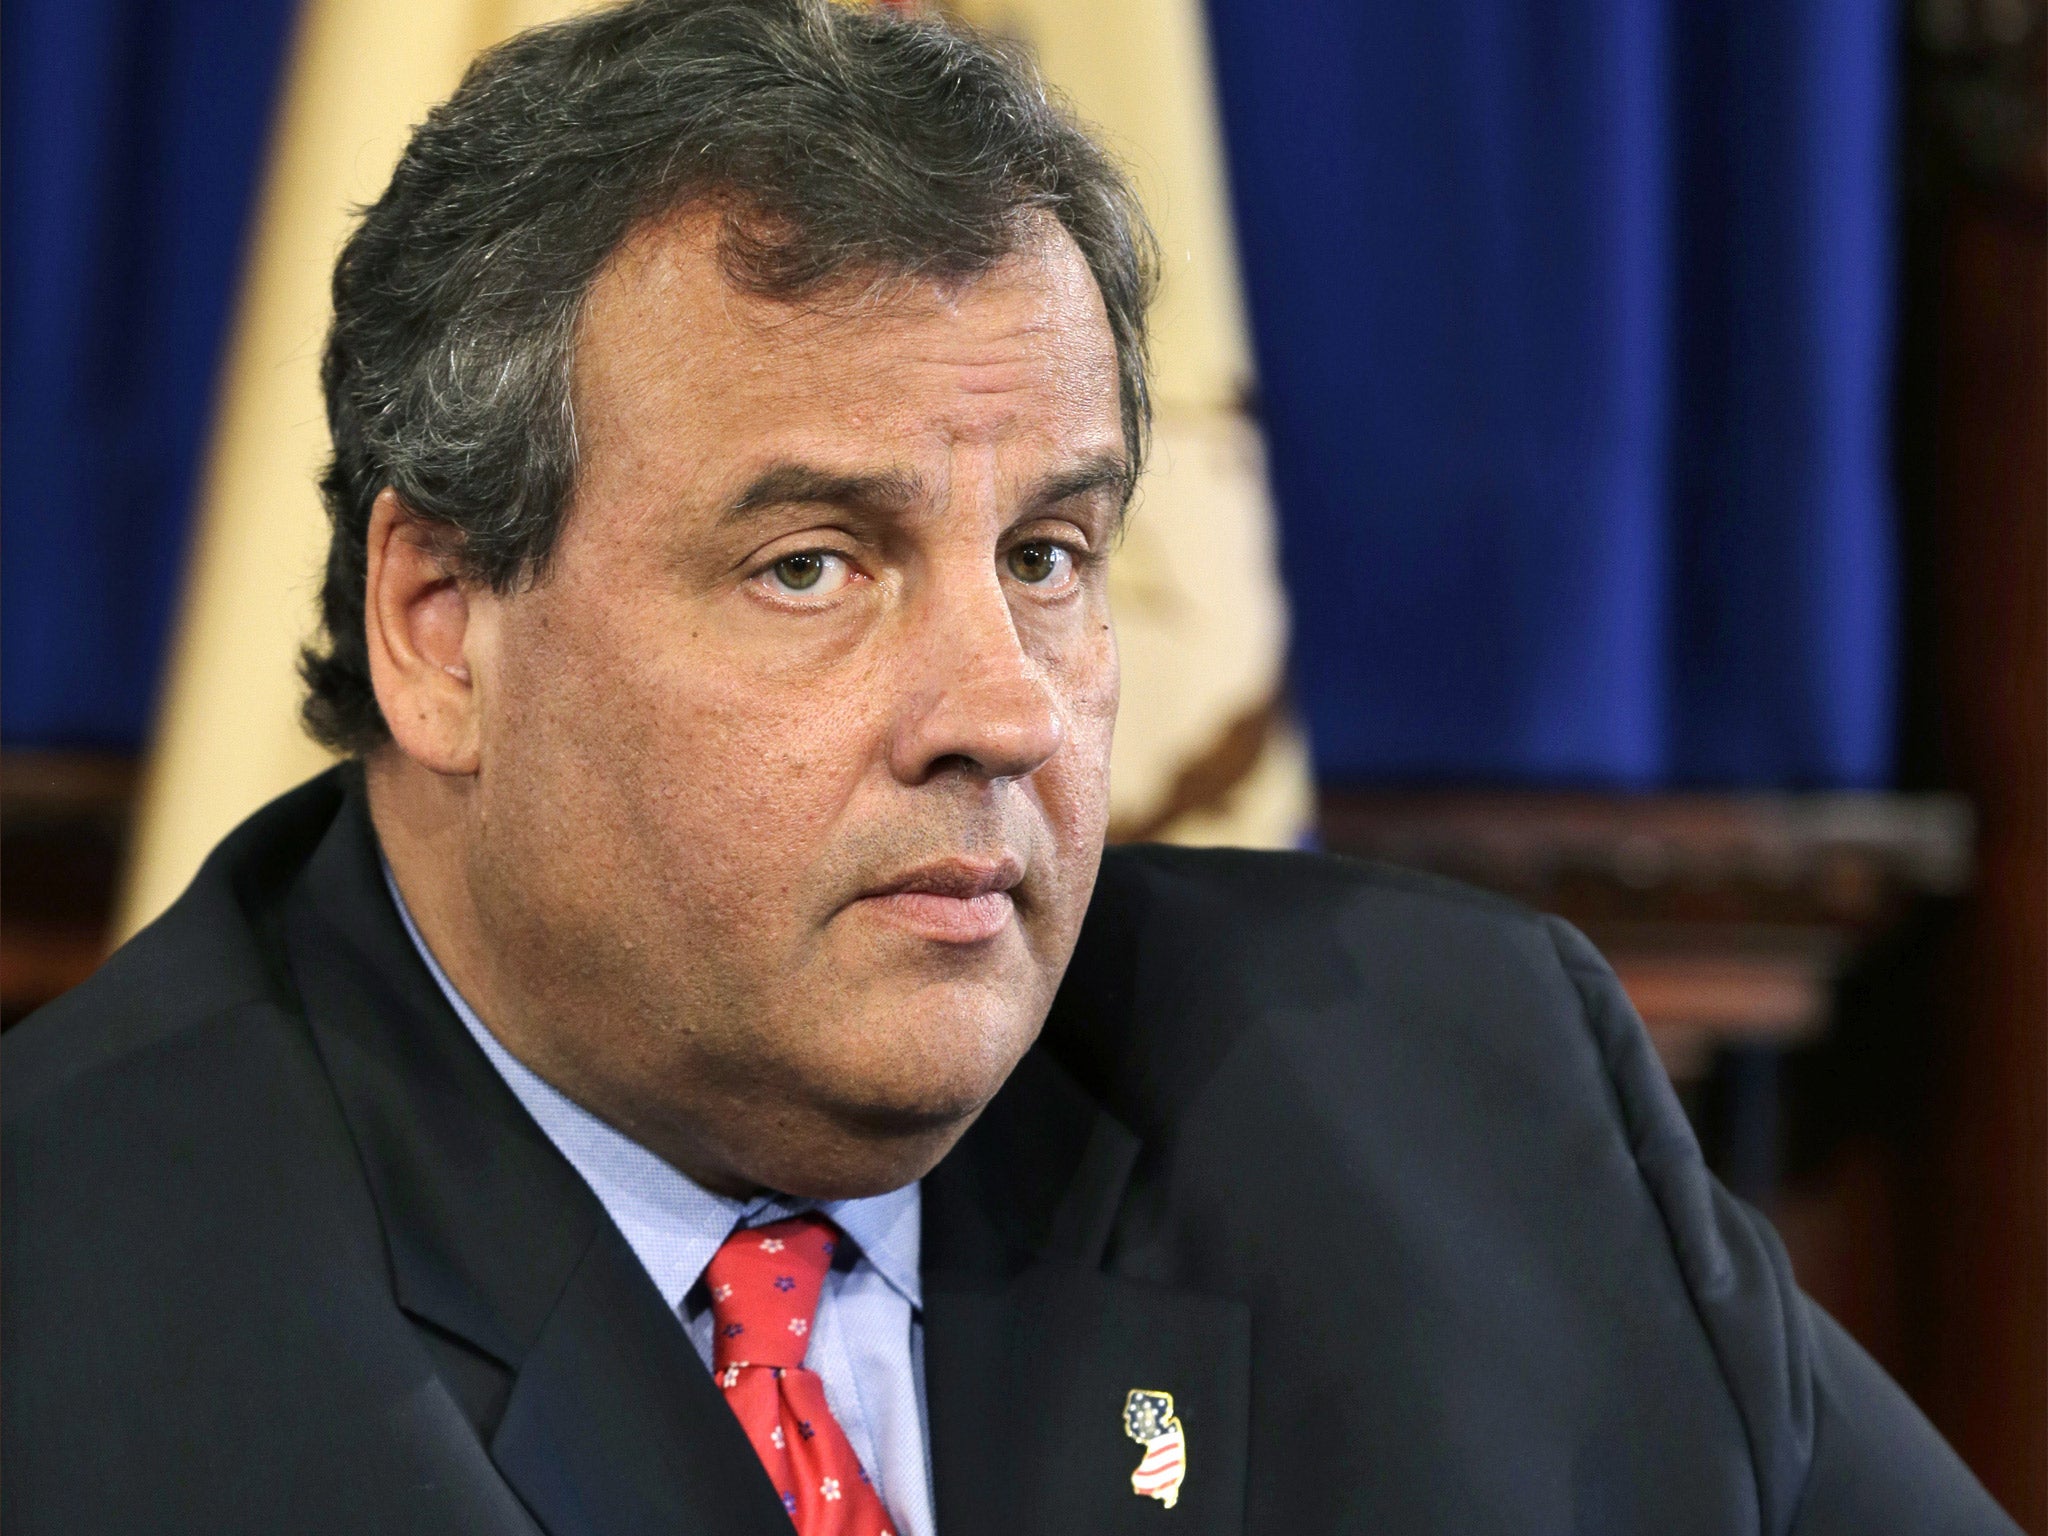 Chris Christie has been riding high in polls to be the Republicans’ presidential candidate in 2016